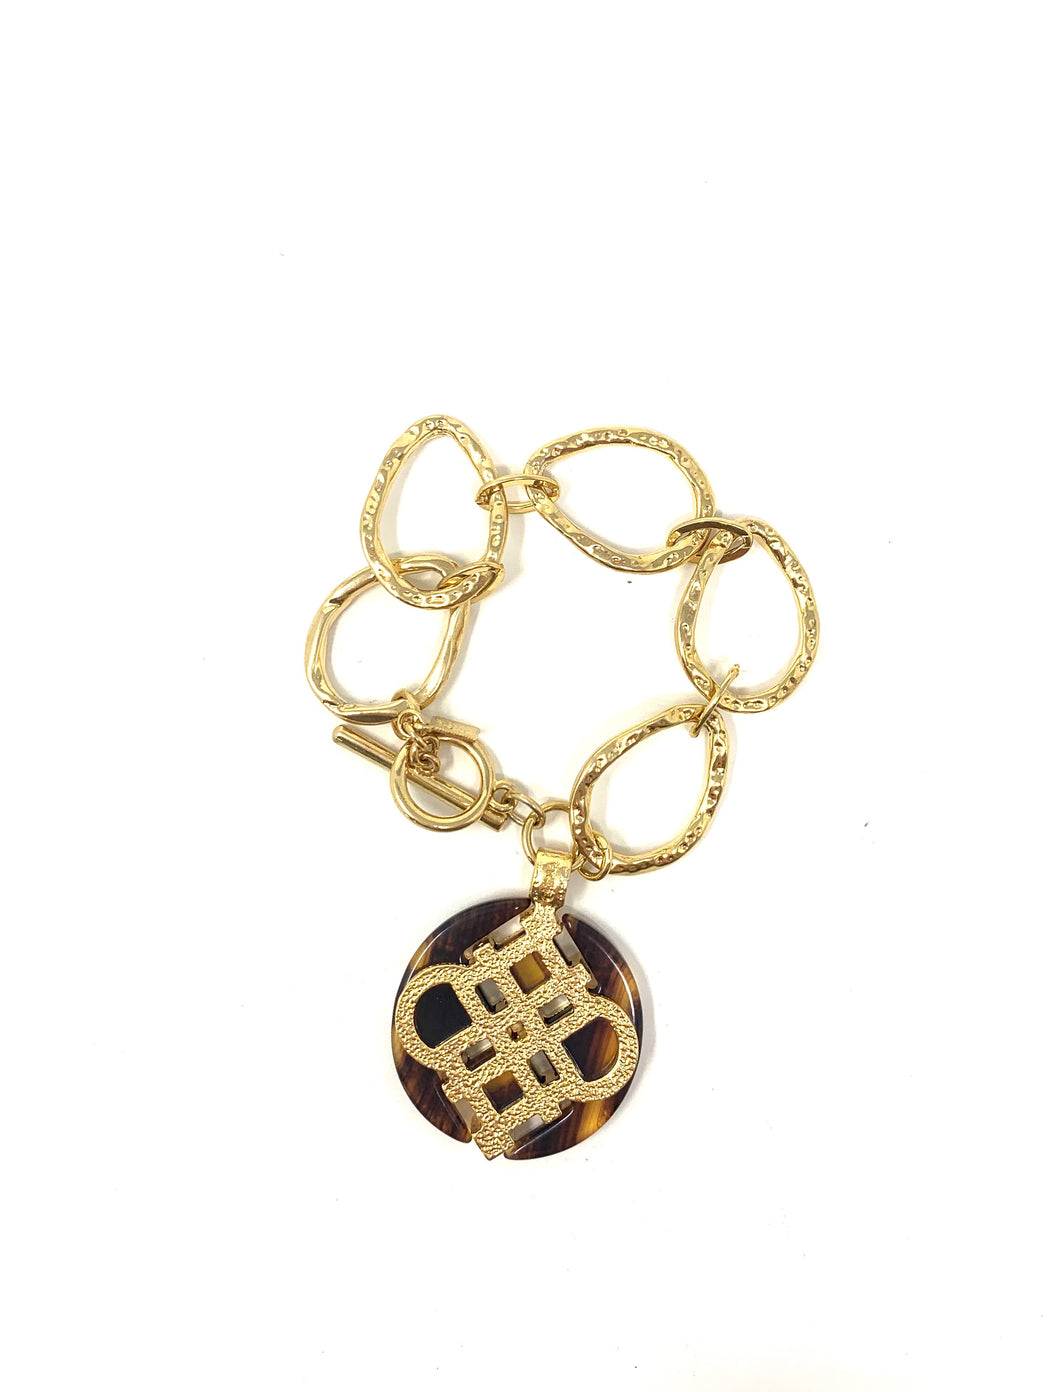 Chunky Golden Chain Bracelet With Large Tortoise Shell Charm